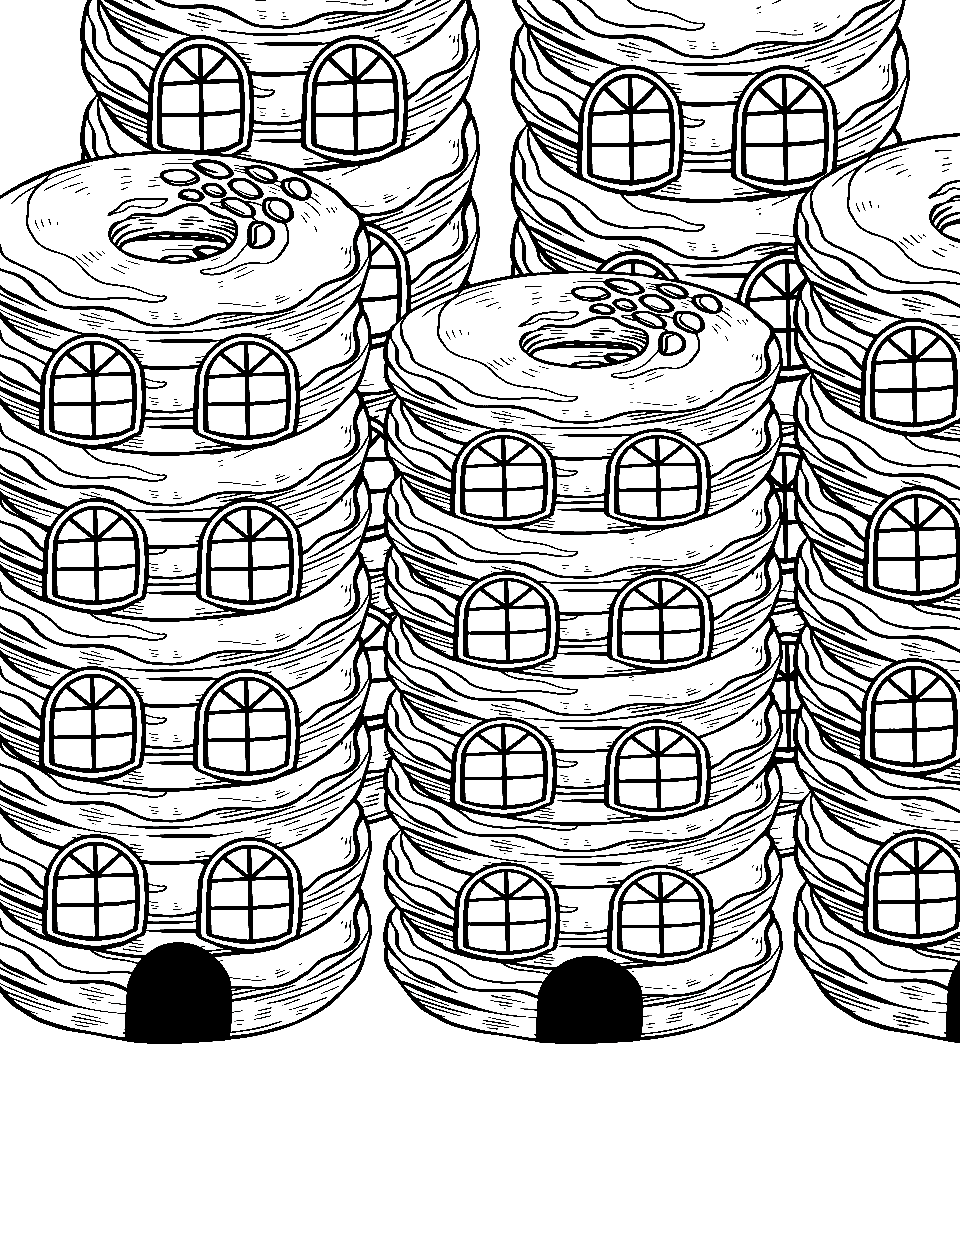 Donut City Coloring Page - A city consisting of tall skyscrapers made out of donuts.